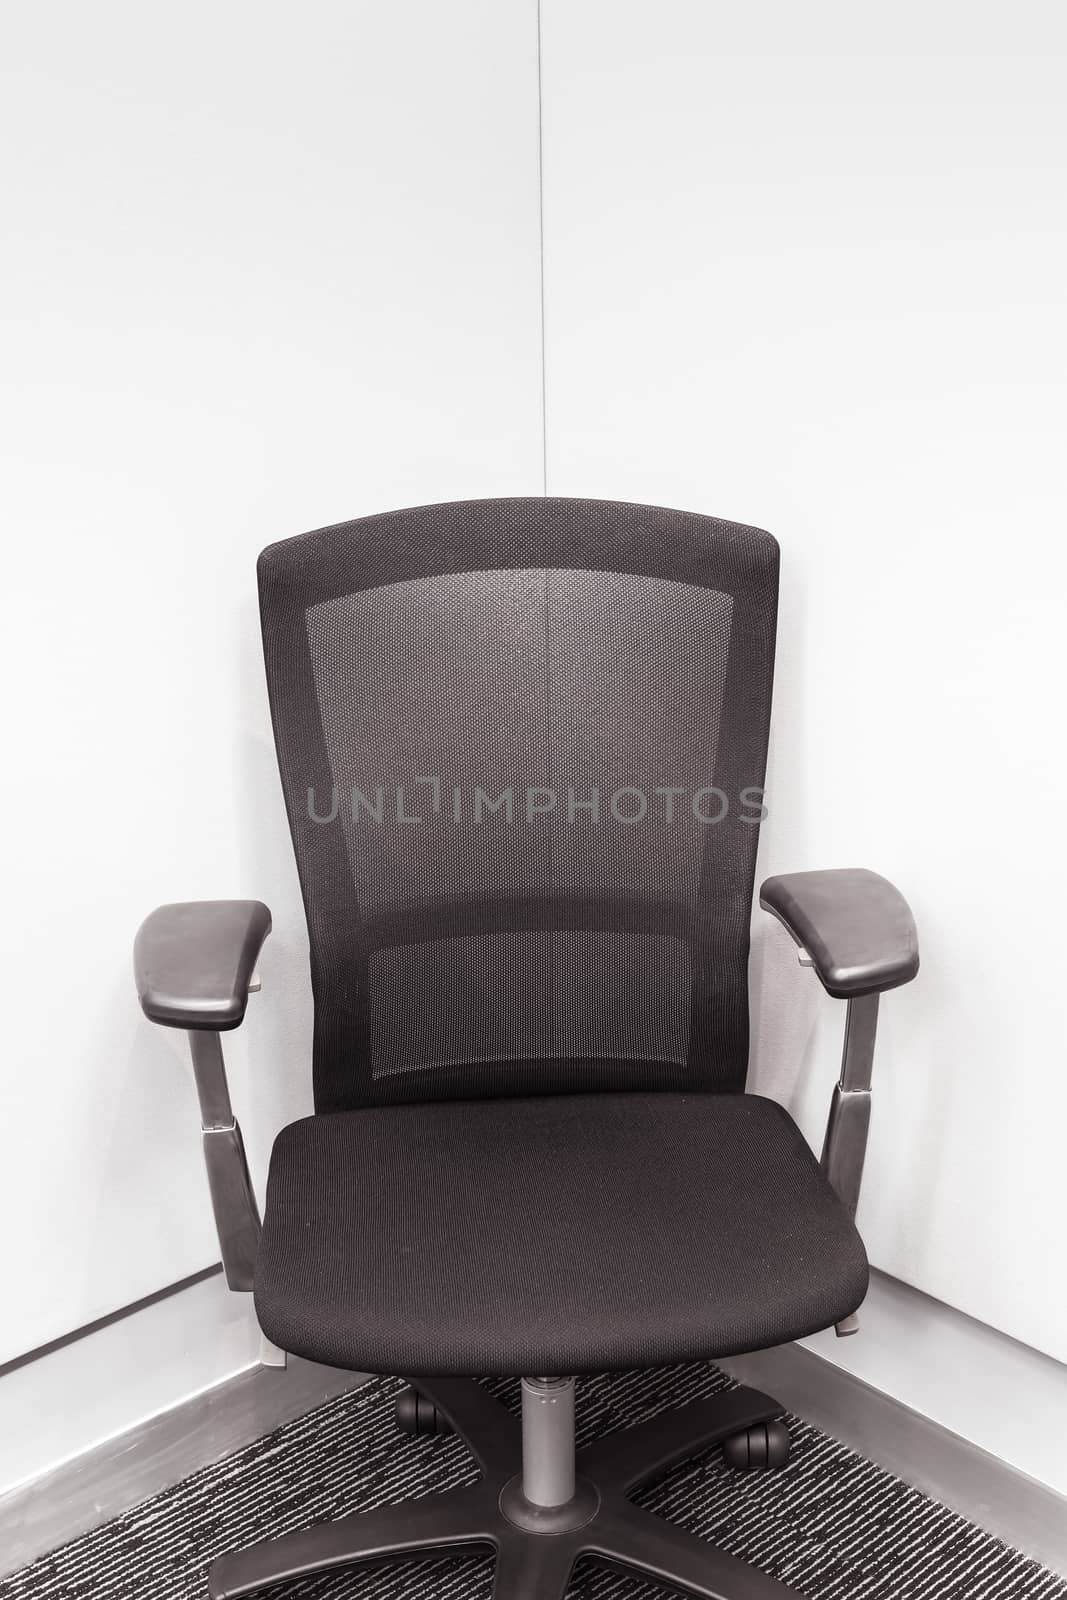 manager chair in the corner, Black color for office or meeting r by FrameAngel